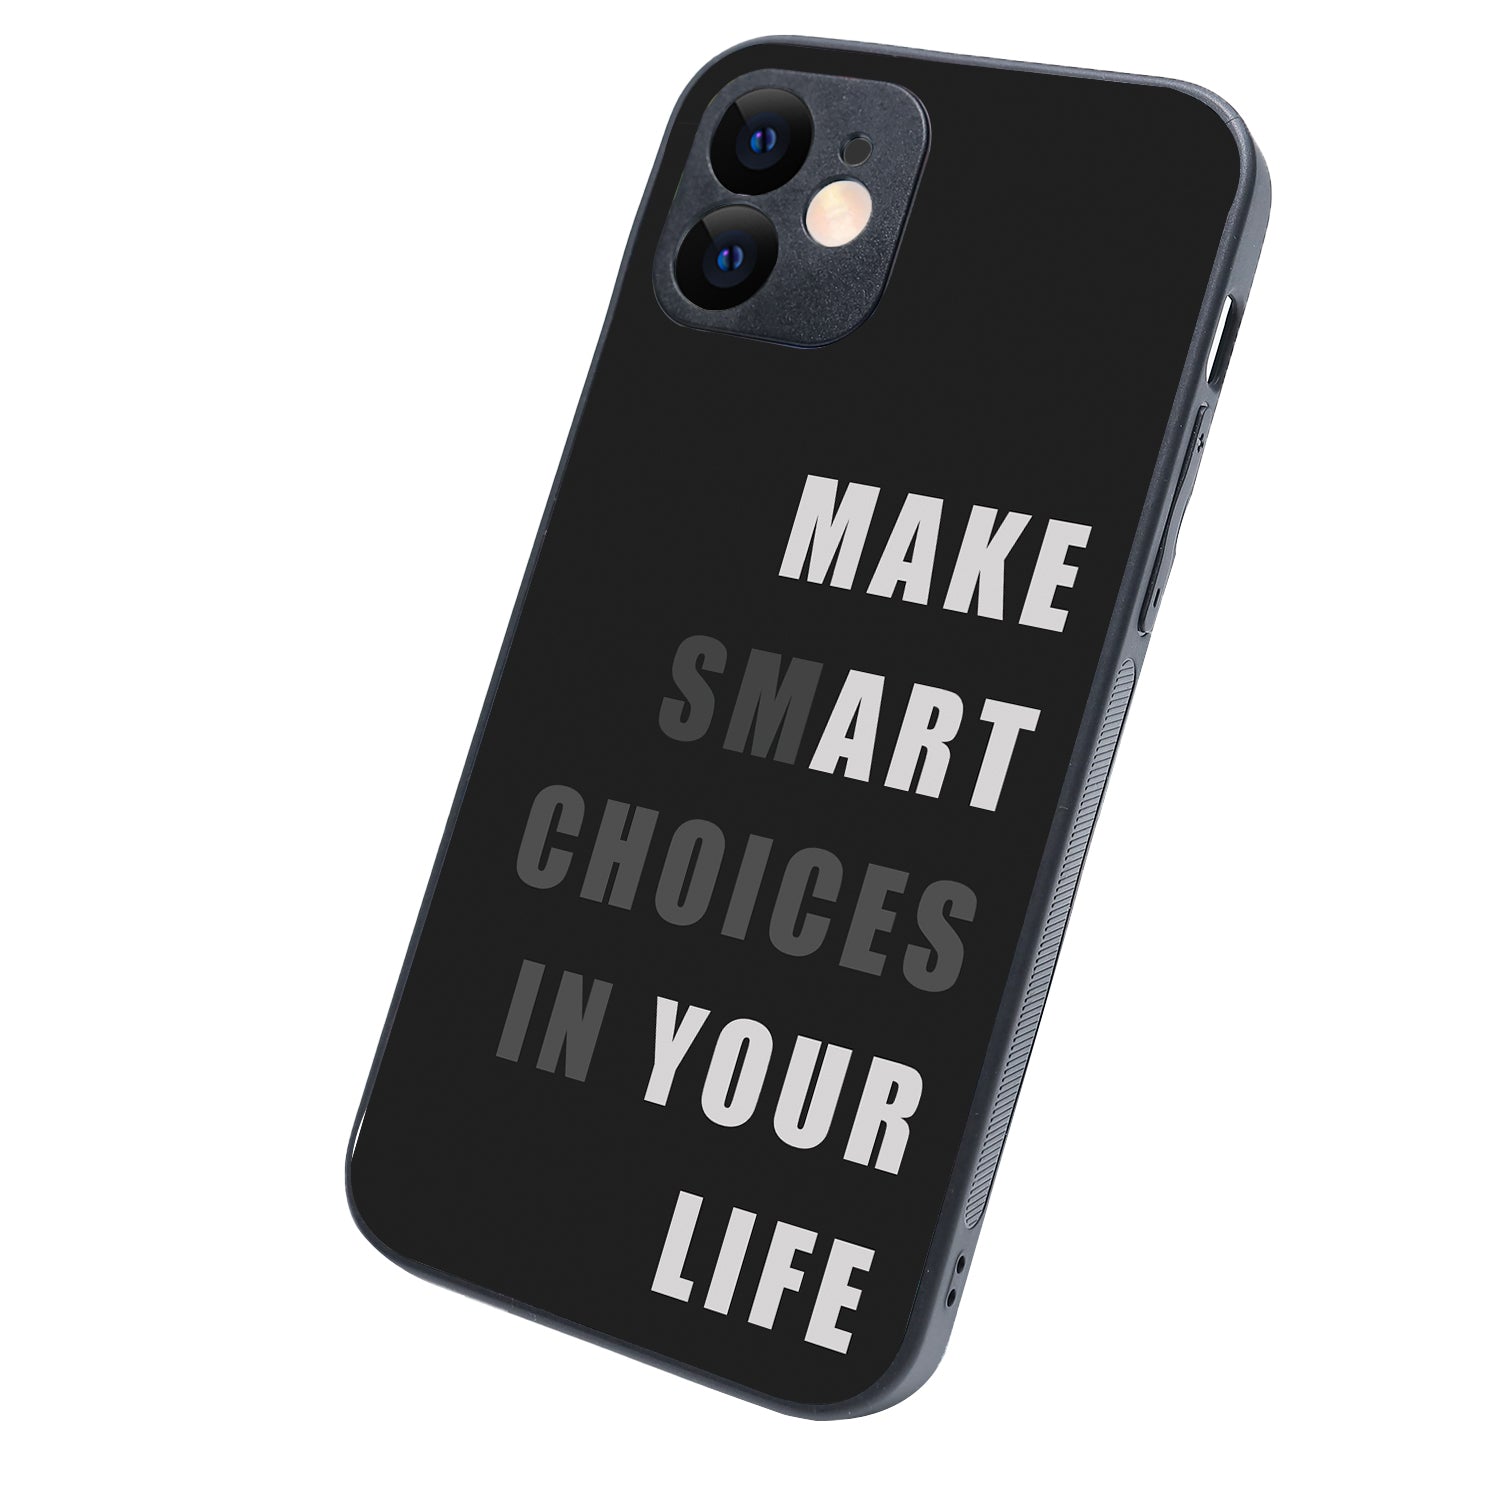 Smart Choices Motivational Quotes iPhone 12 Case